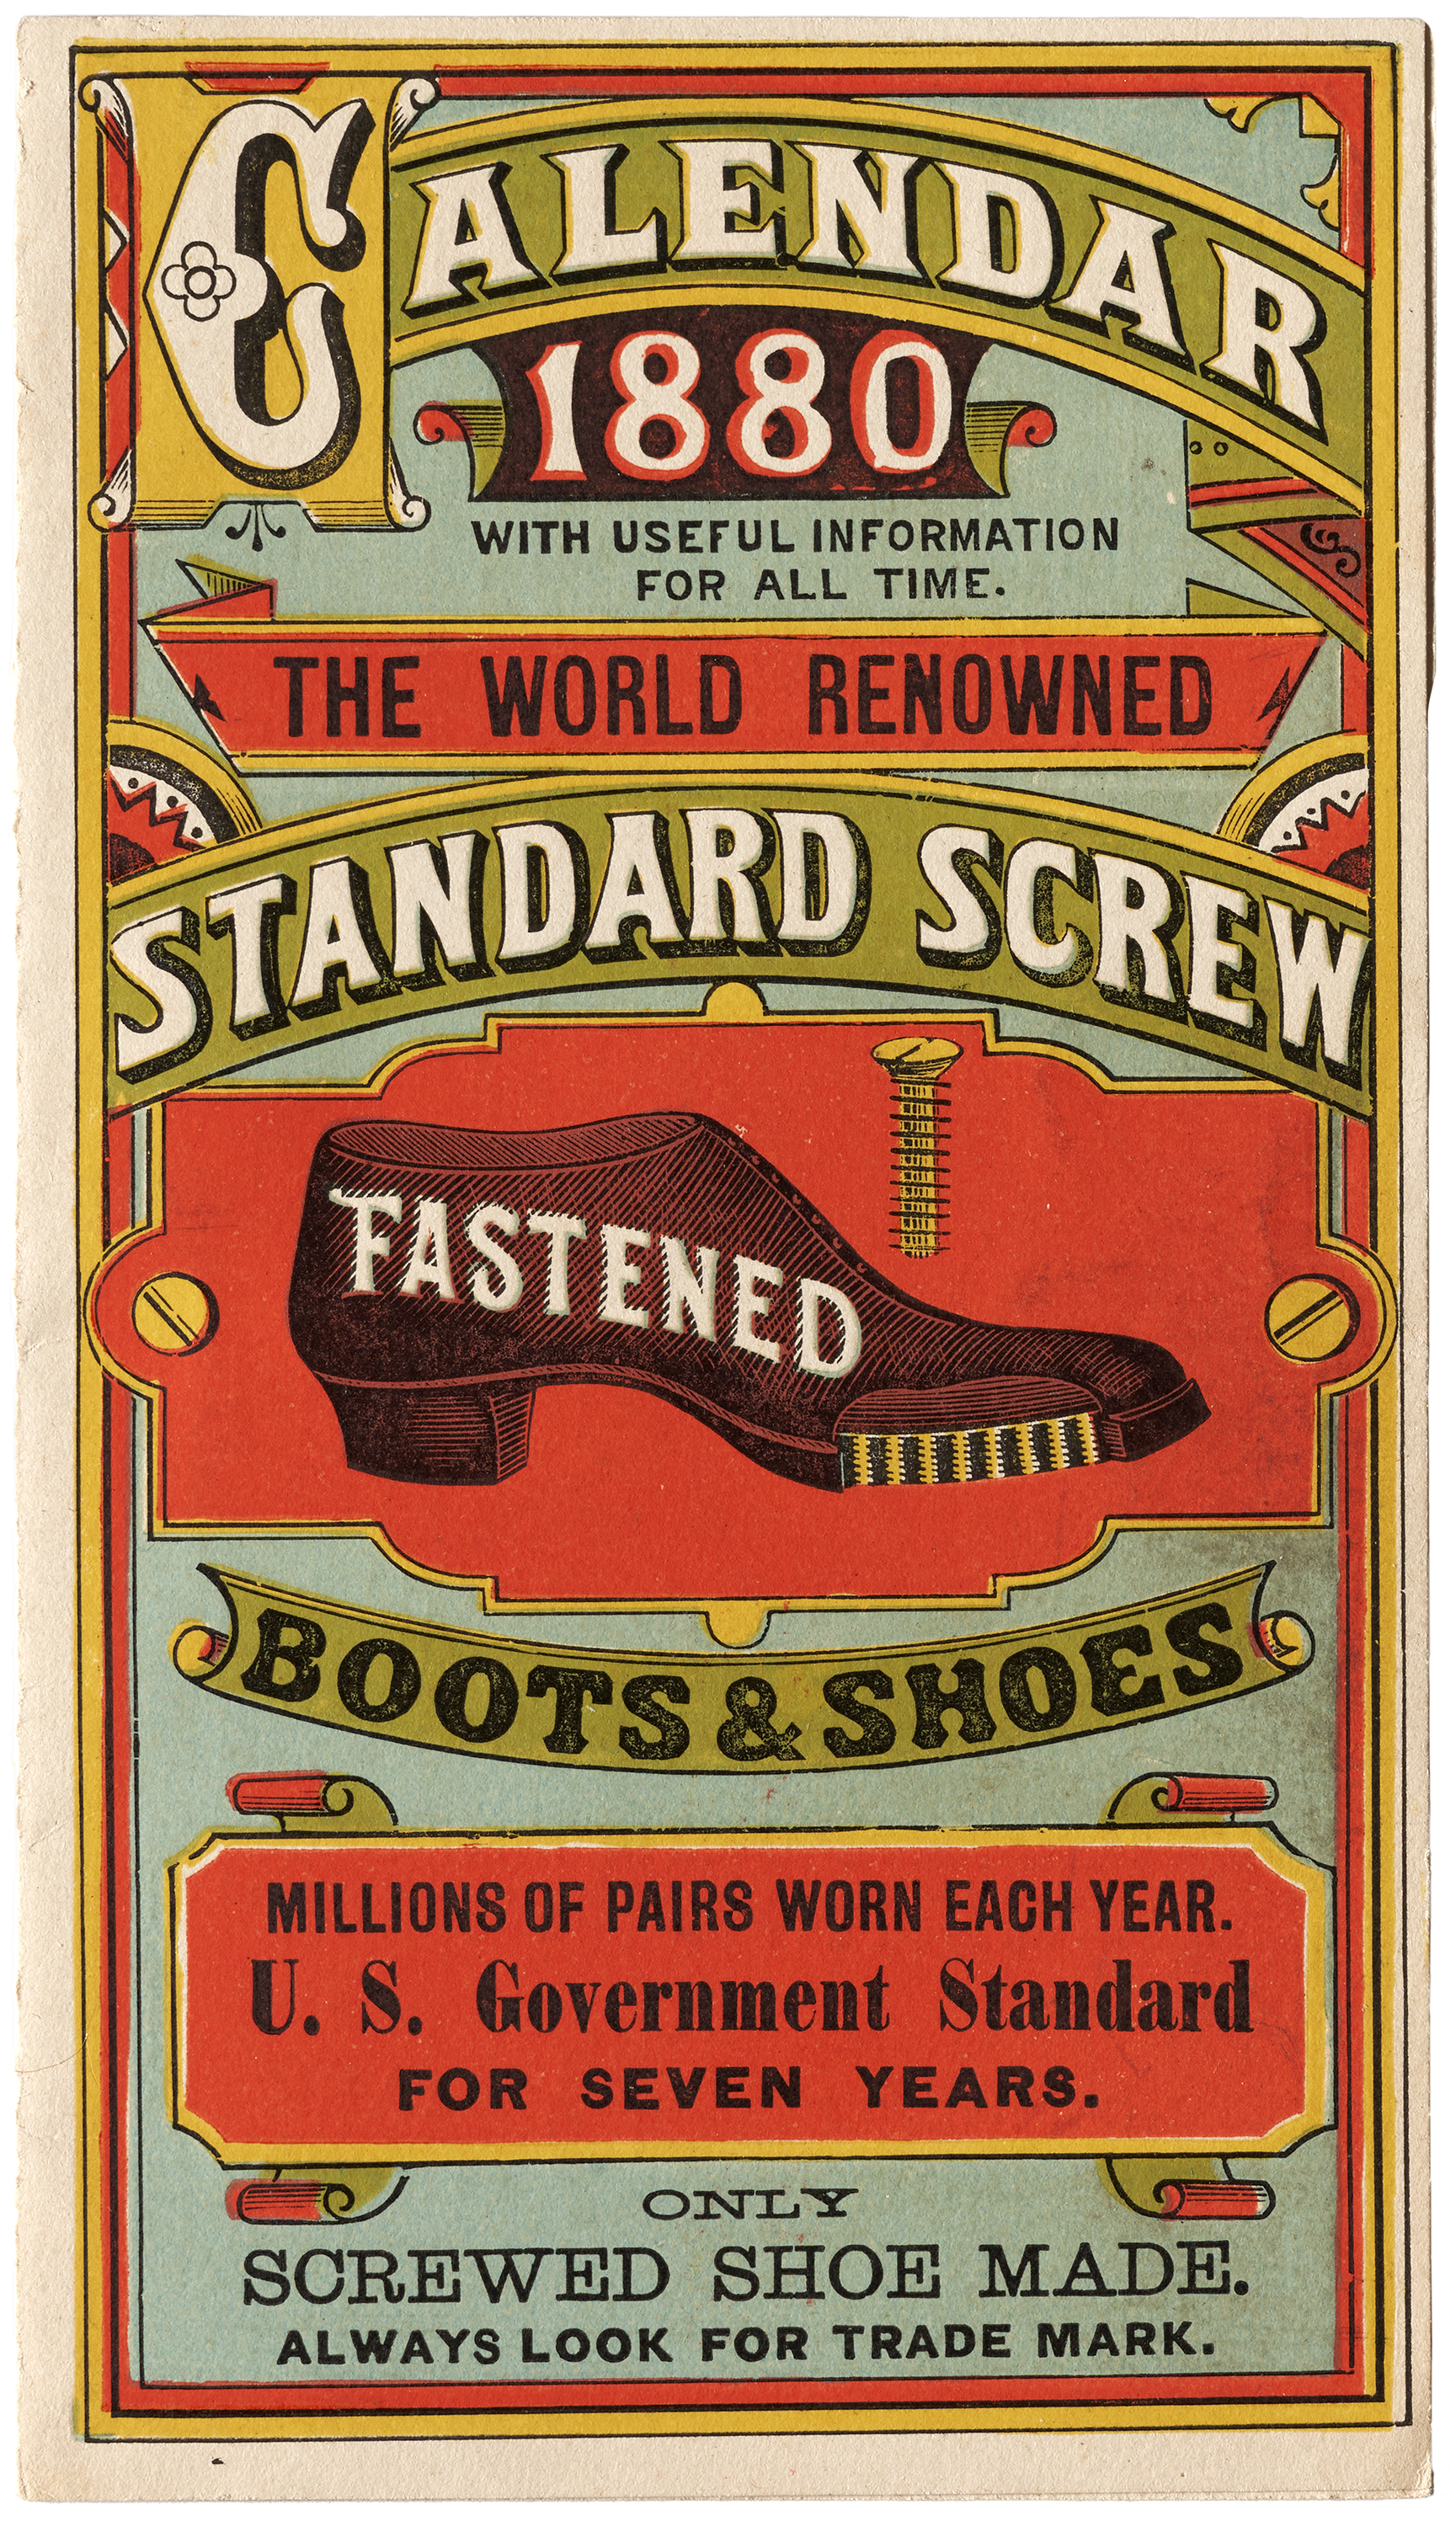 Chromeolithographic calendar doubling as a trade card for Standard Screw brand shoes, Boston, 1880